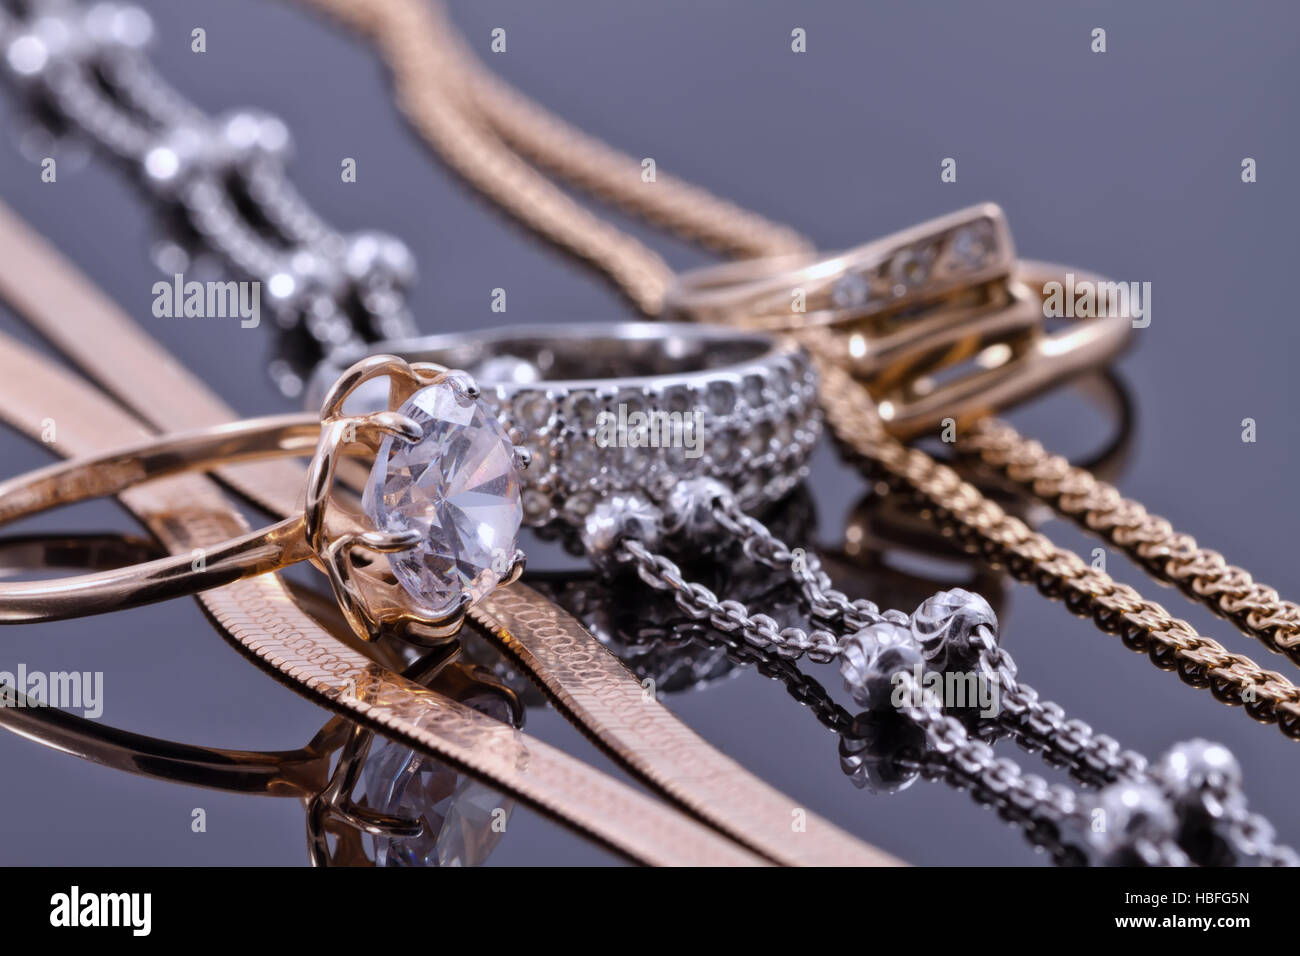 gold ring, earrings and chains Stock Photo